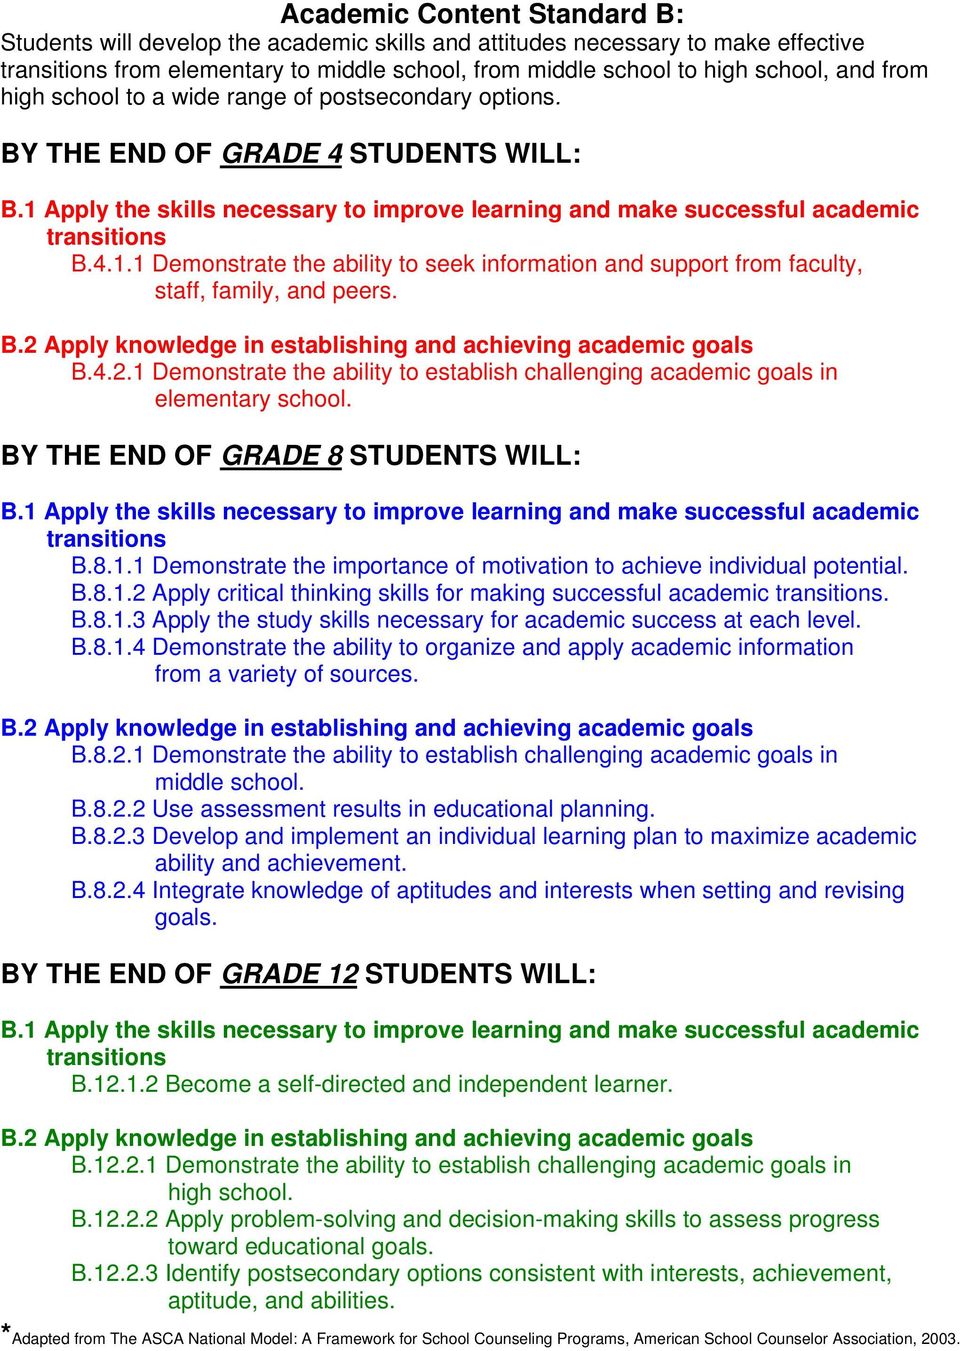 B.2 Apply knowledge in establishing and achieving academic goals B.4.2.1 Demonstrate the ability to establish challenging academic goals in elementary school. B.1 Apply the skills necessary to improve learning and make successful academic transitions B.